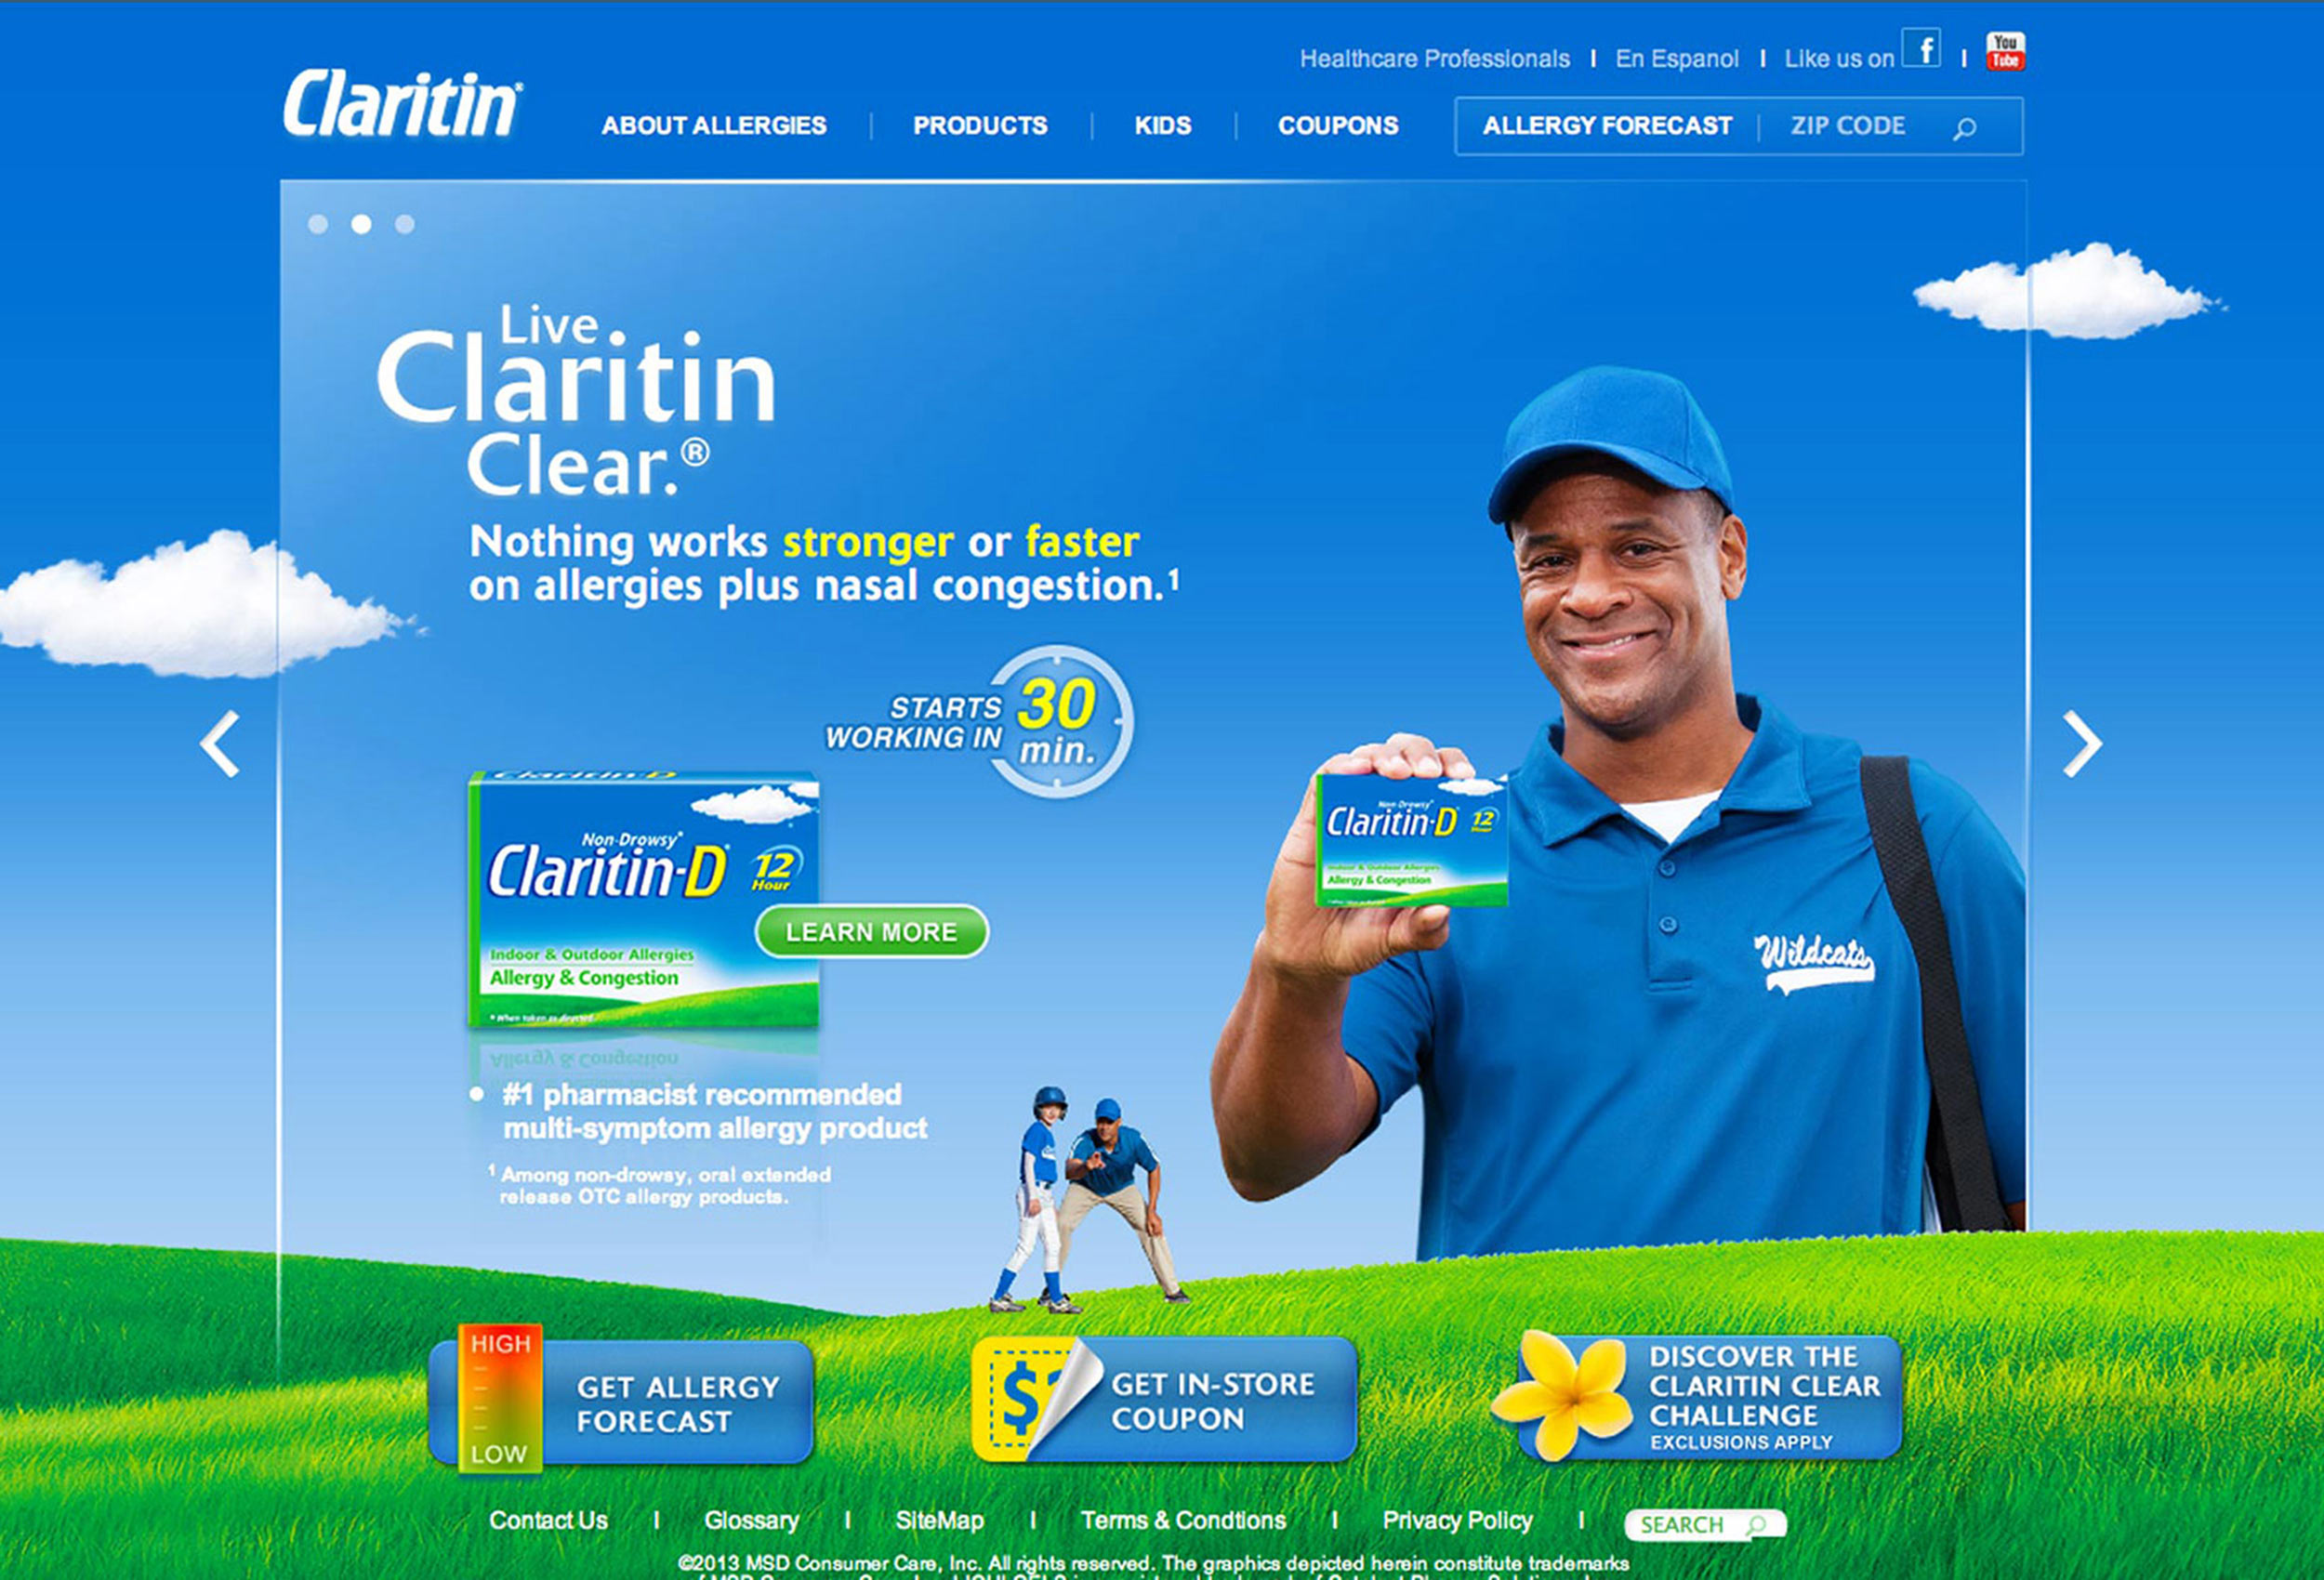 Screen grab from Claritin Clear website advertising campaign